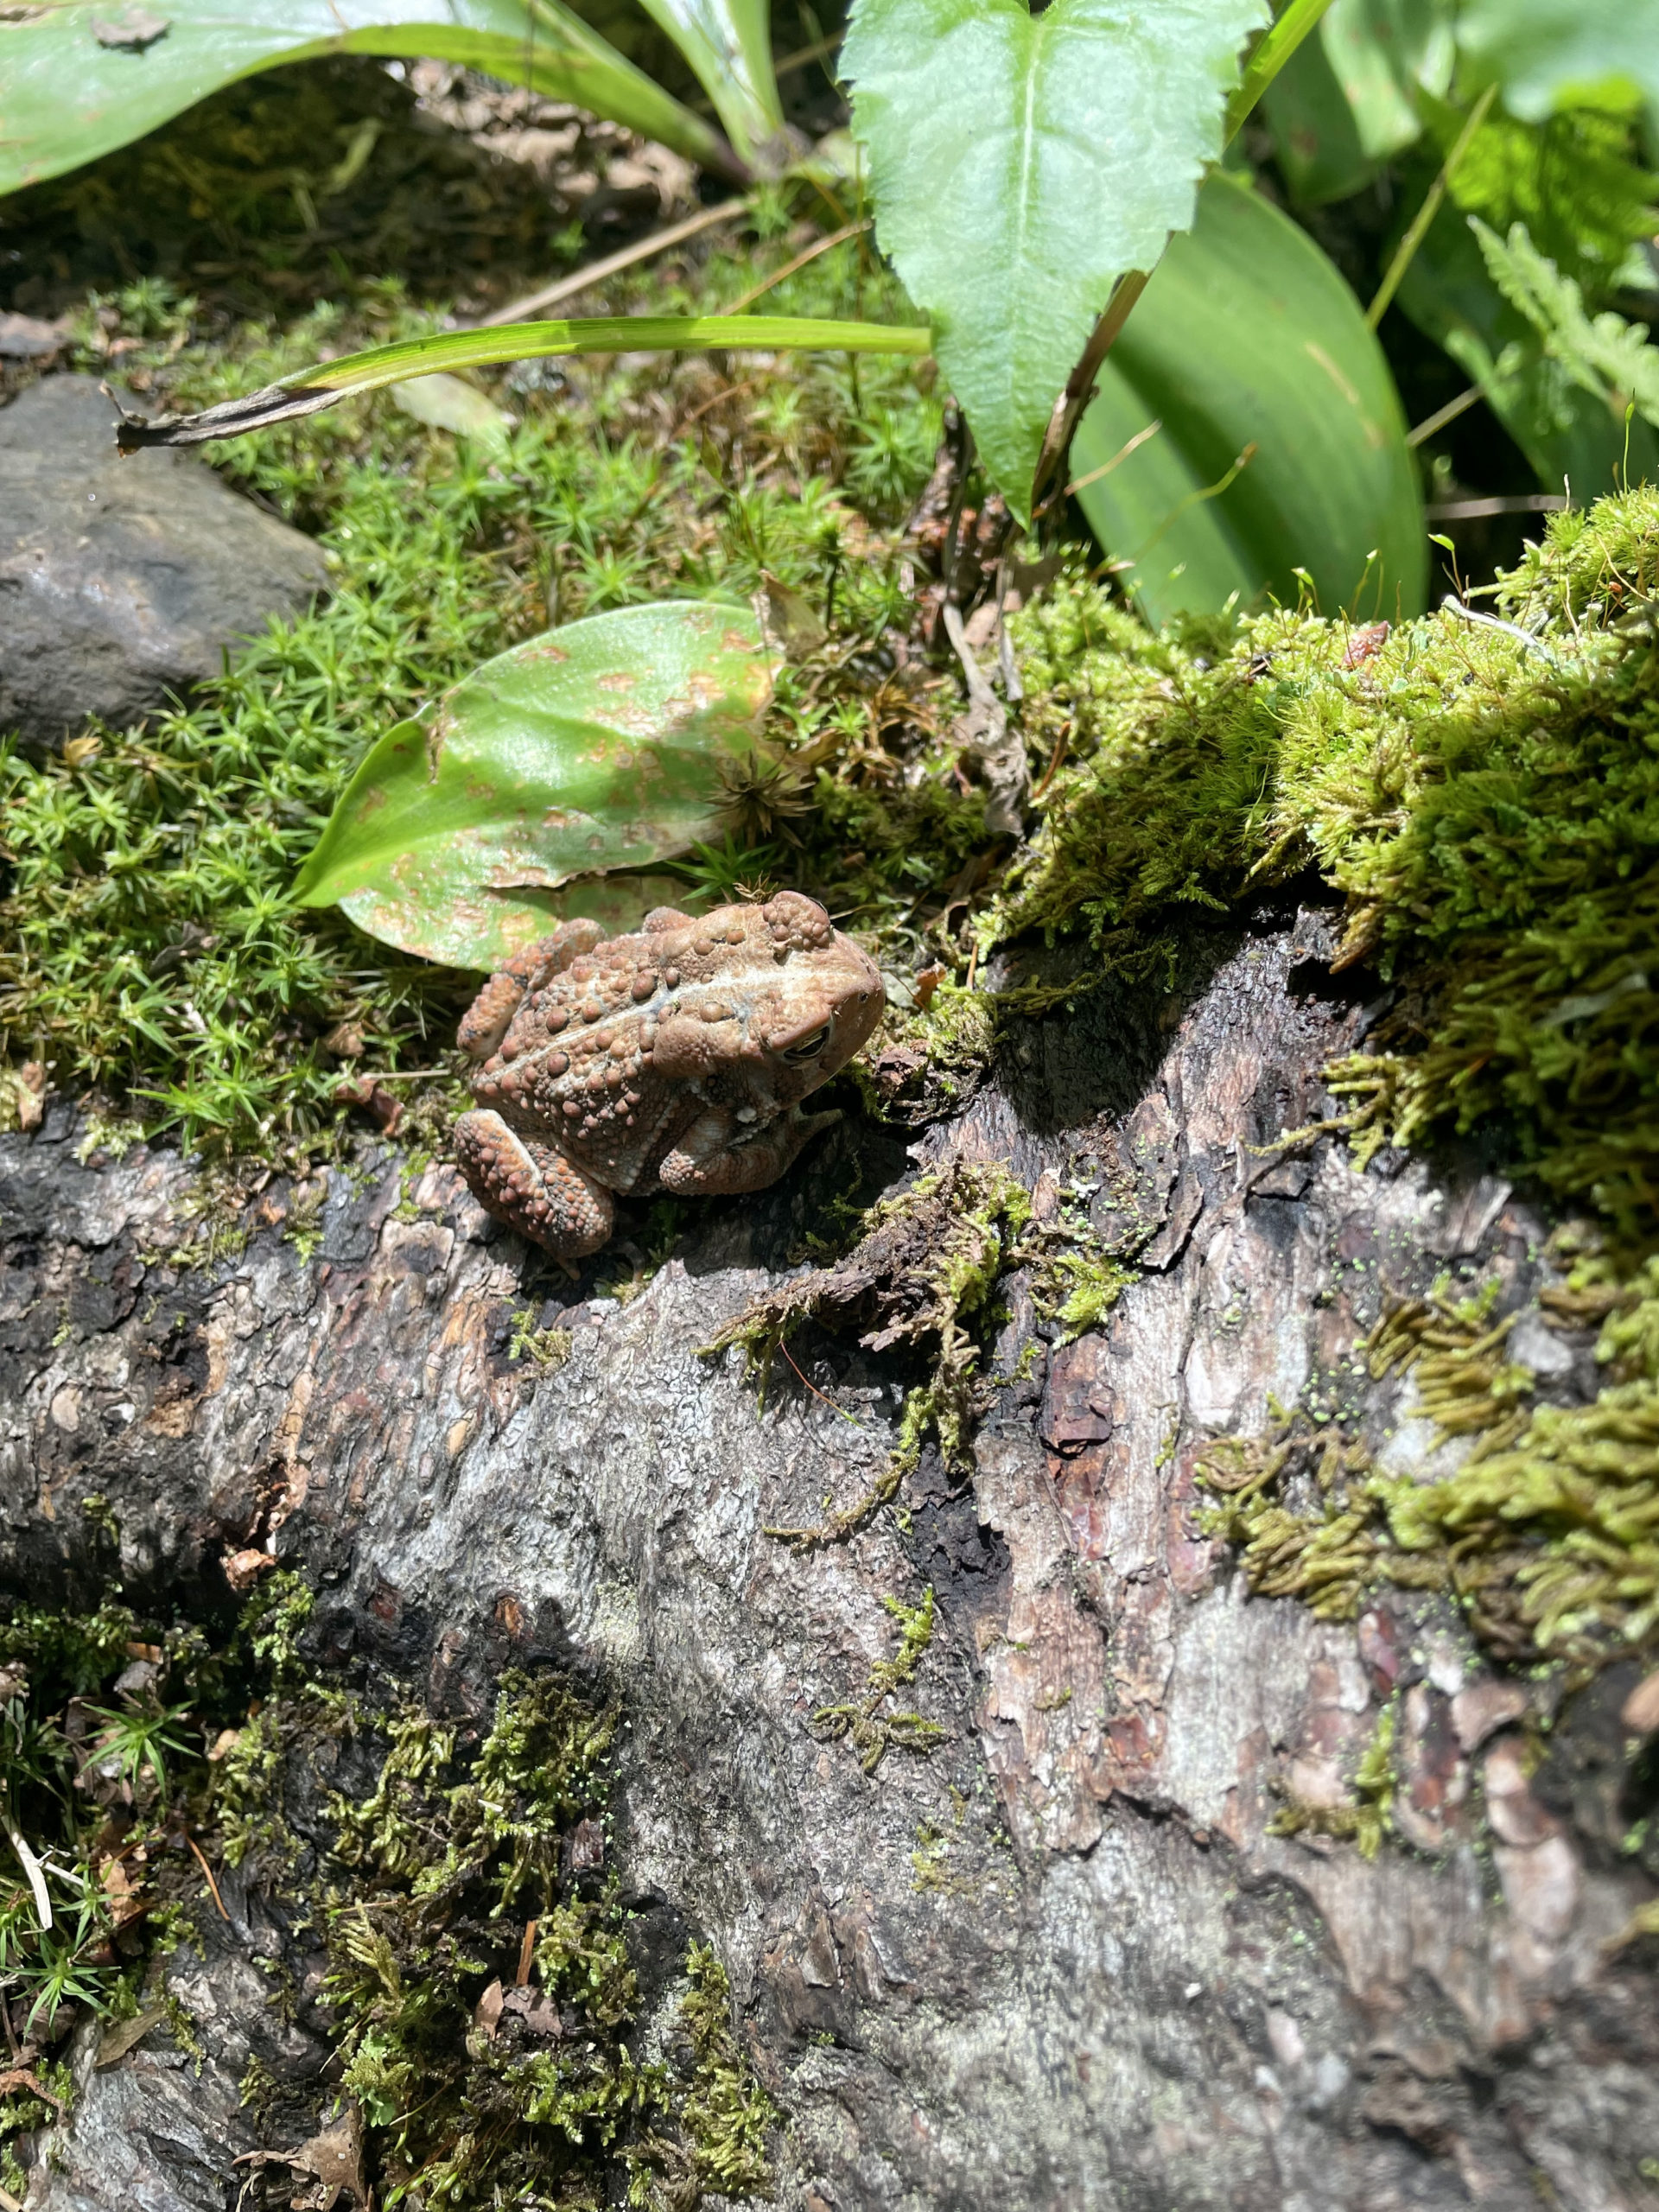 Frog in the woods, seen while hiking Mt. Waumbek and Mt. Cabot in the White Mountain National Forest, New Hampshire